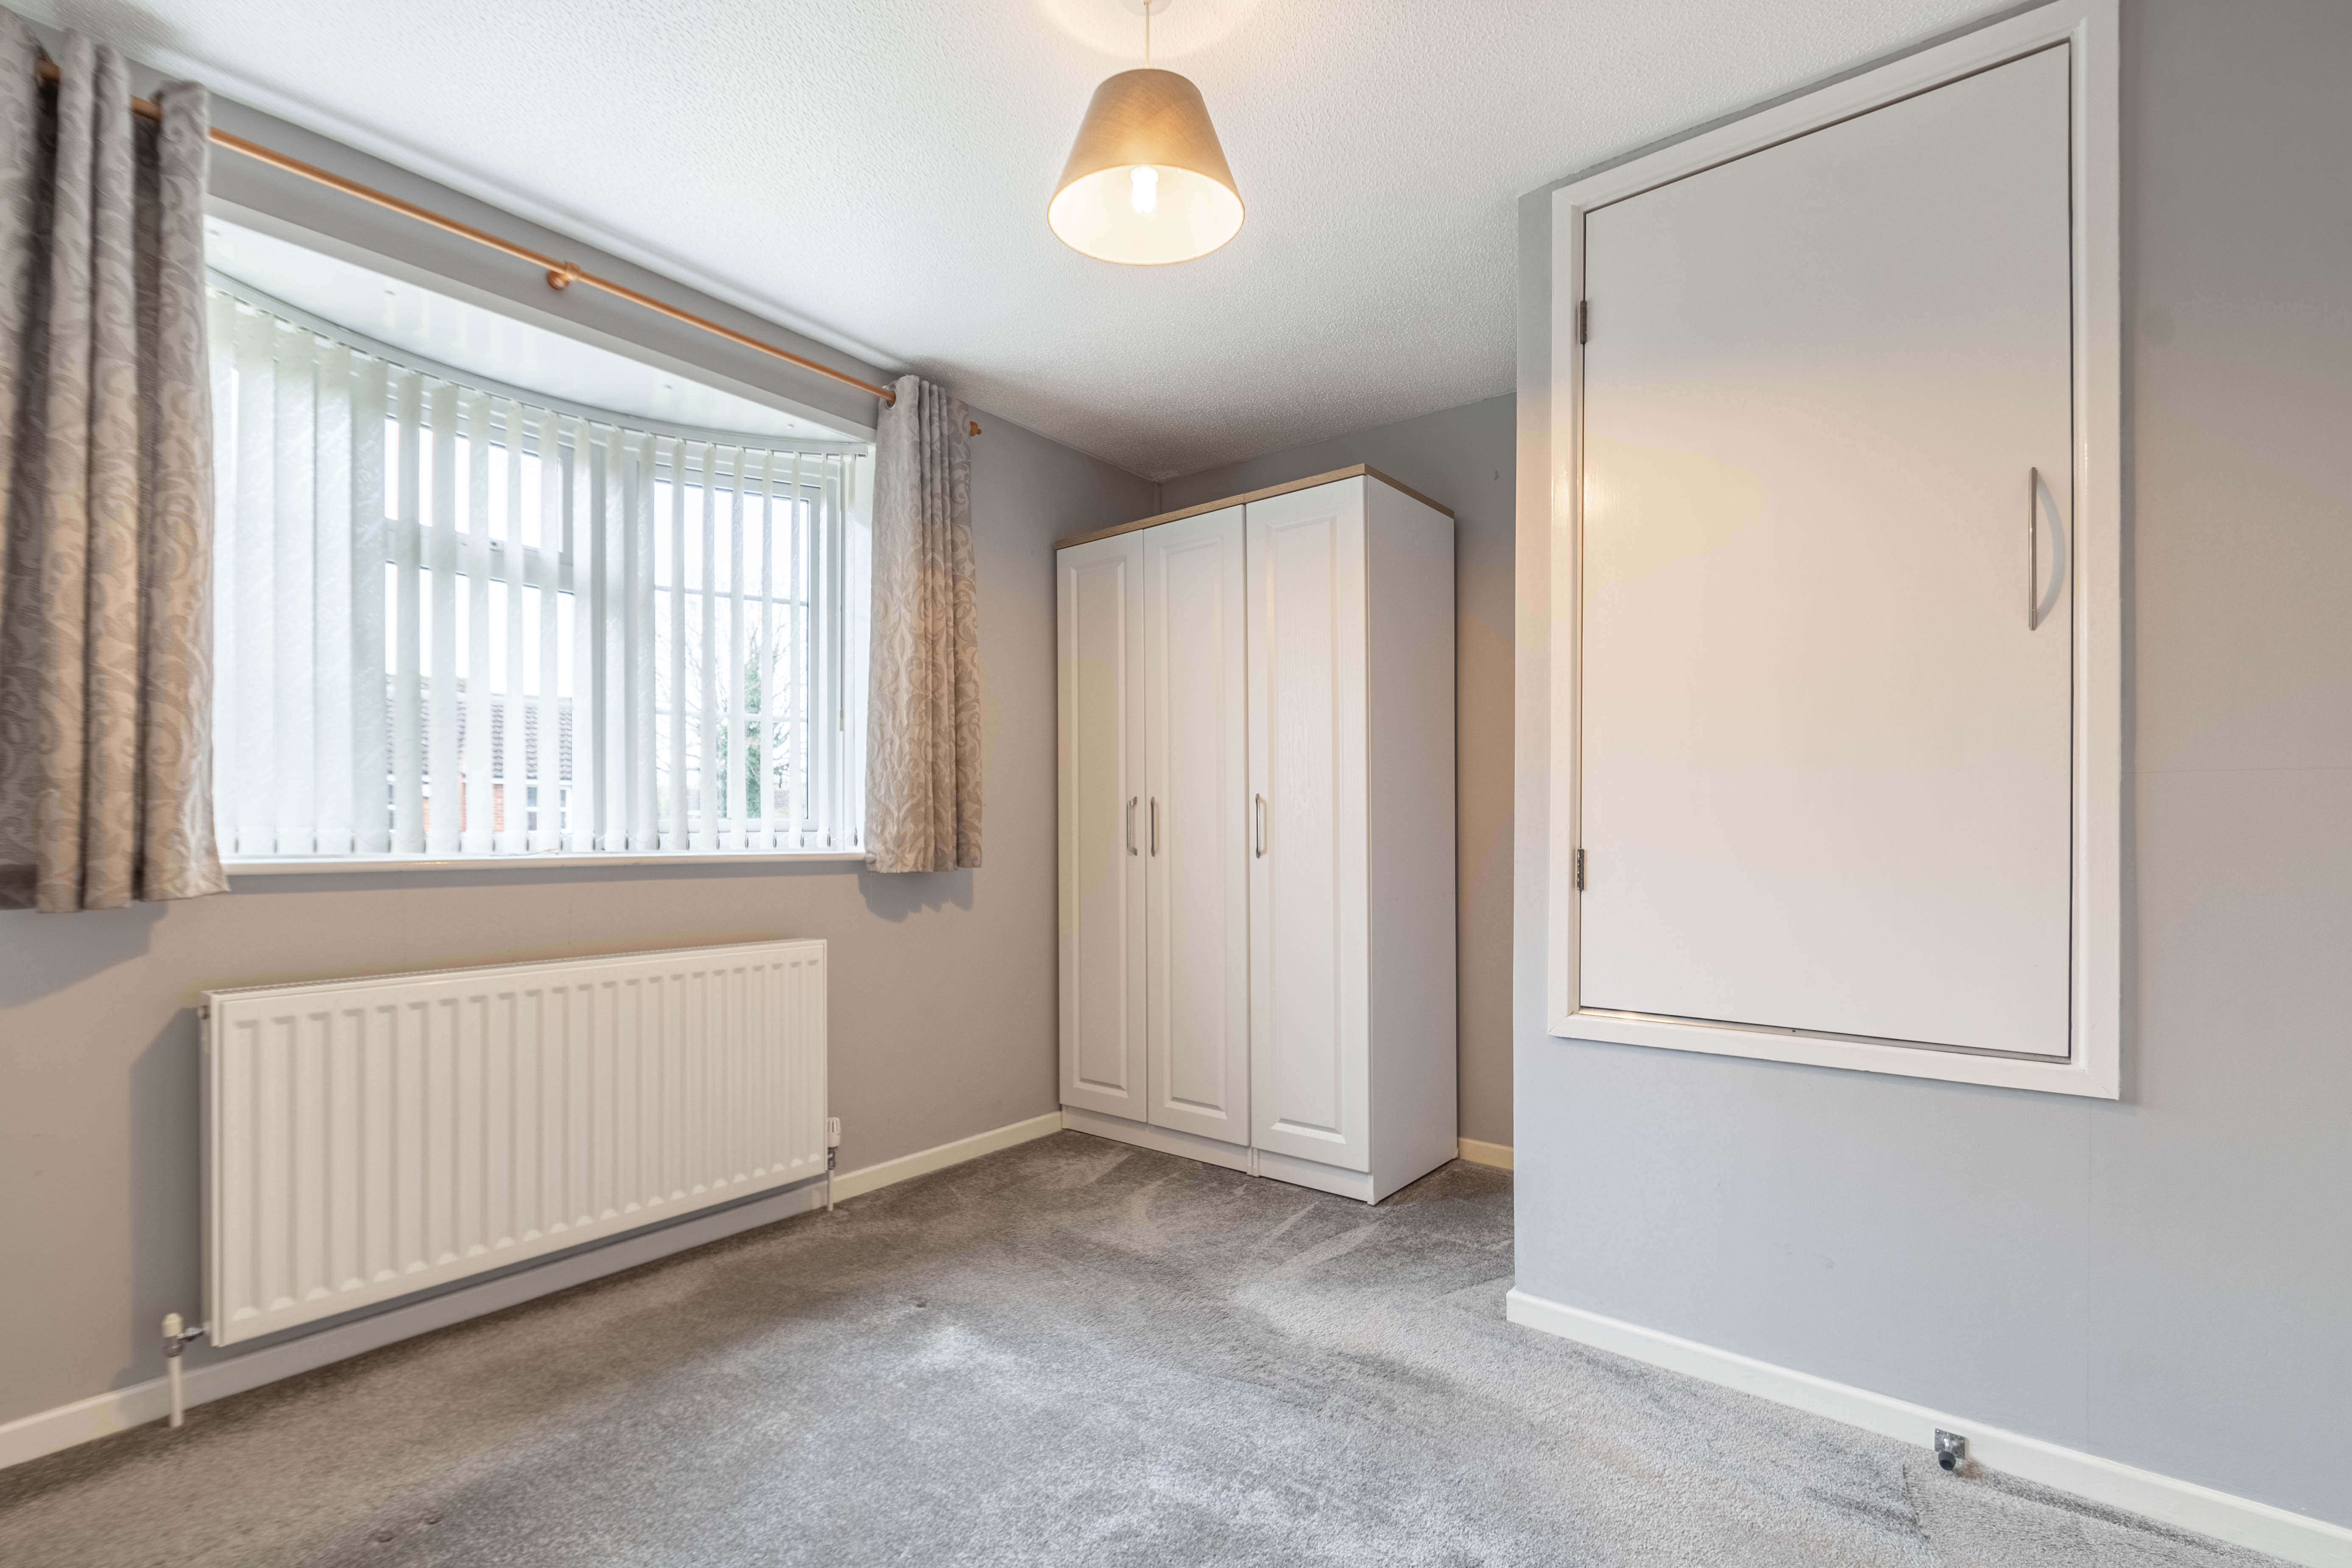 2 bed house for sale in Abbotswood Close, Winyates Green  - Property Image 8